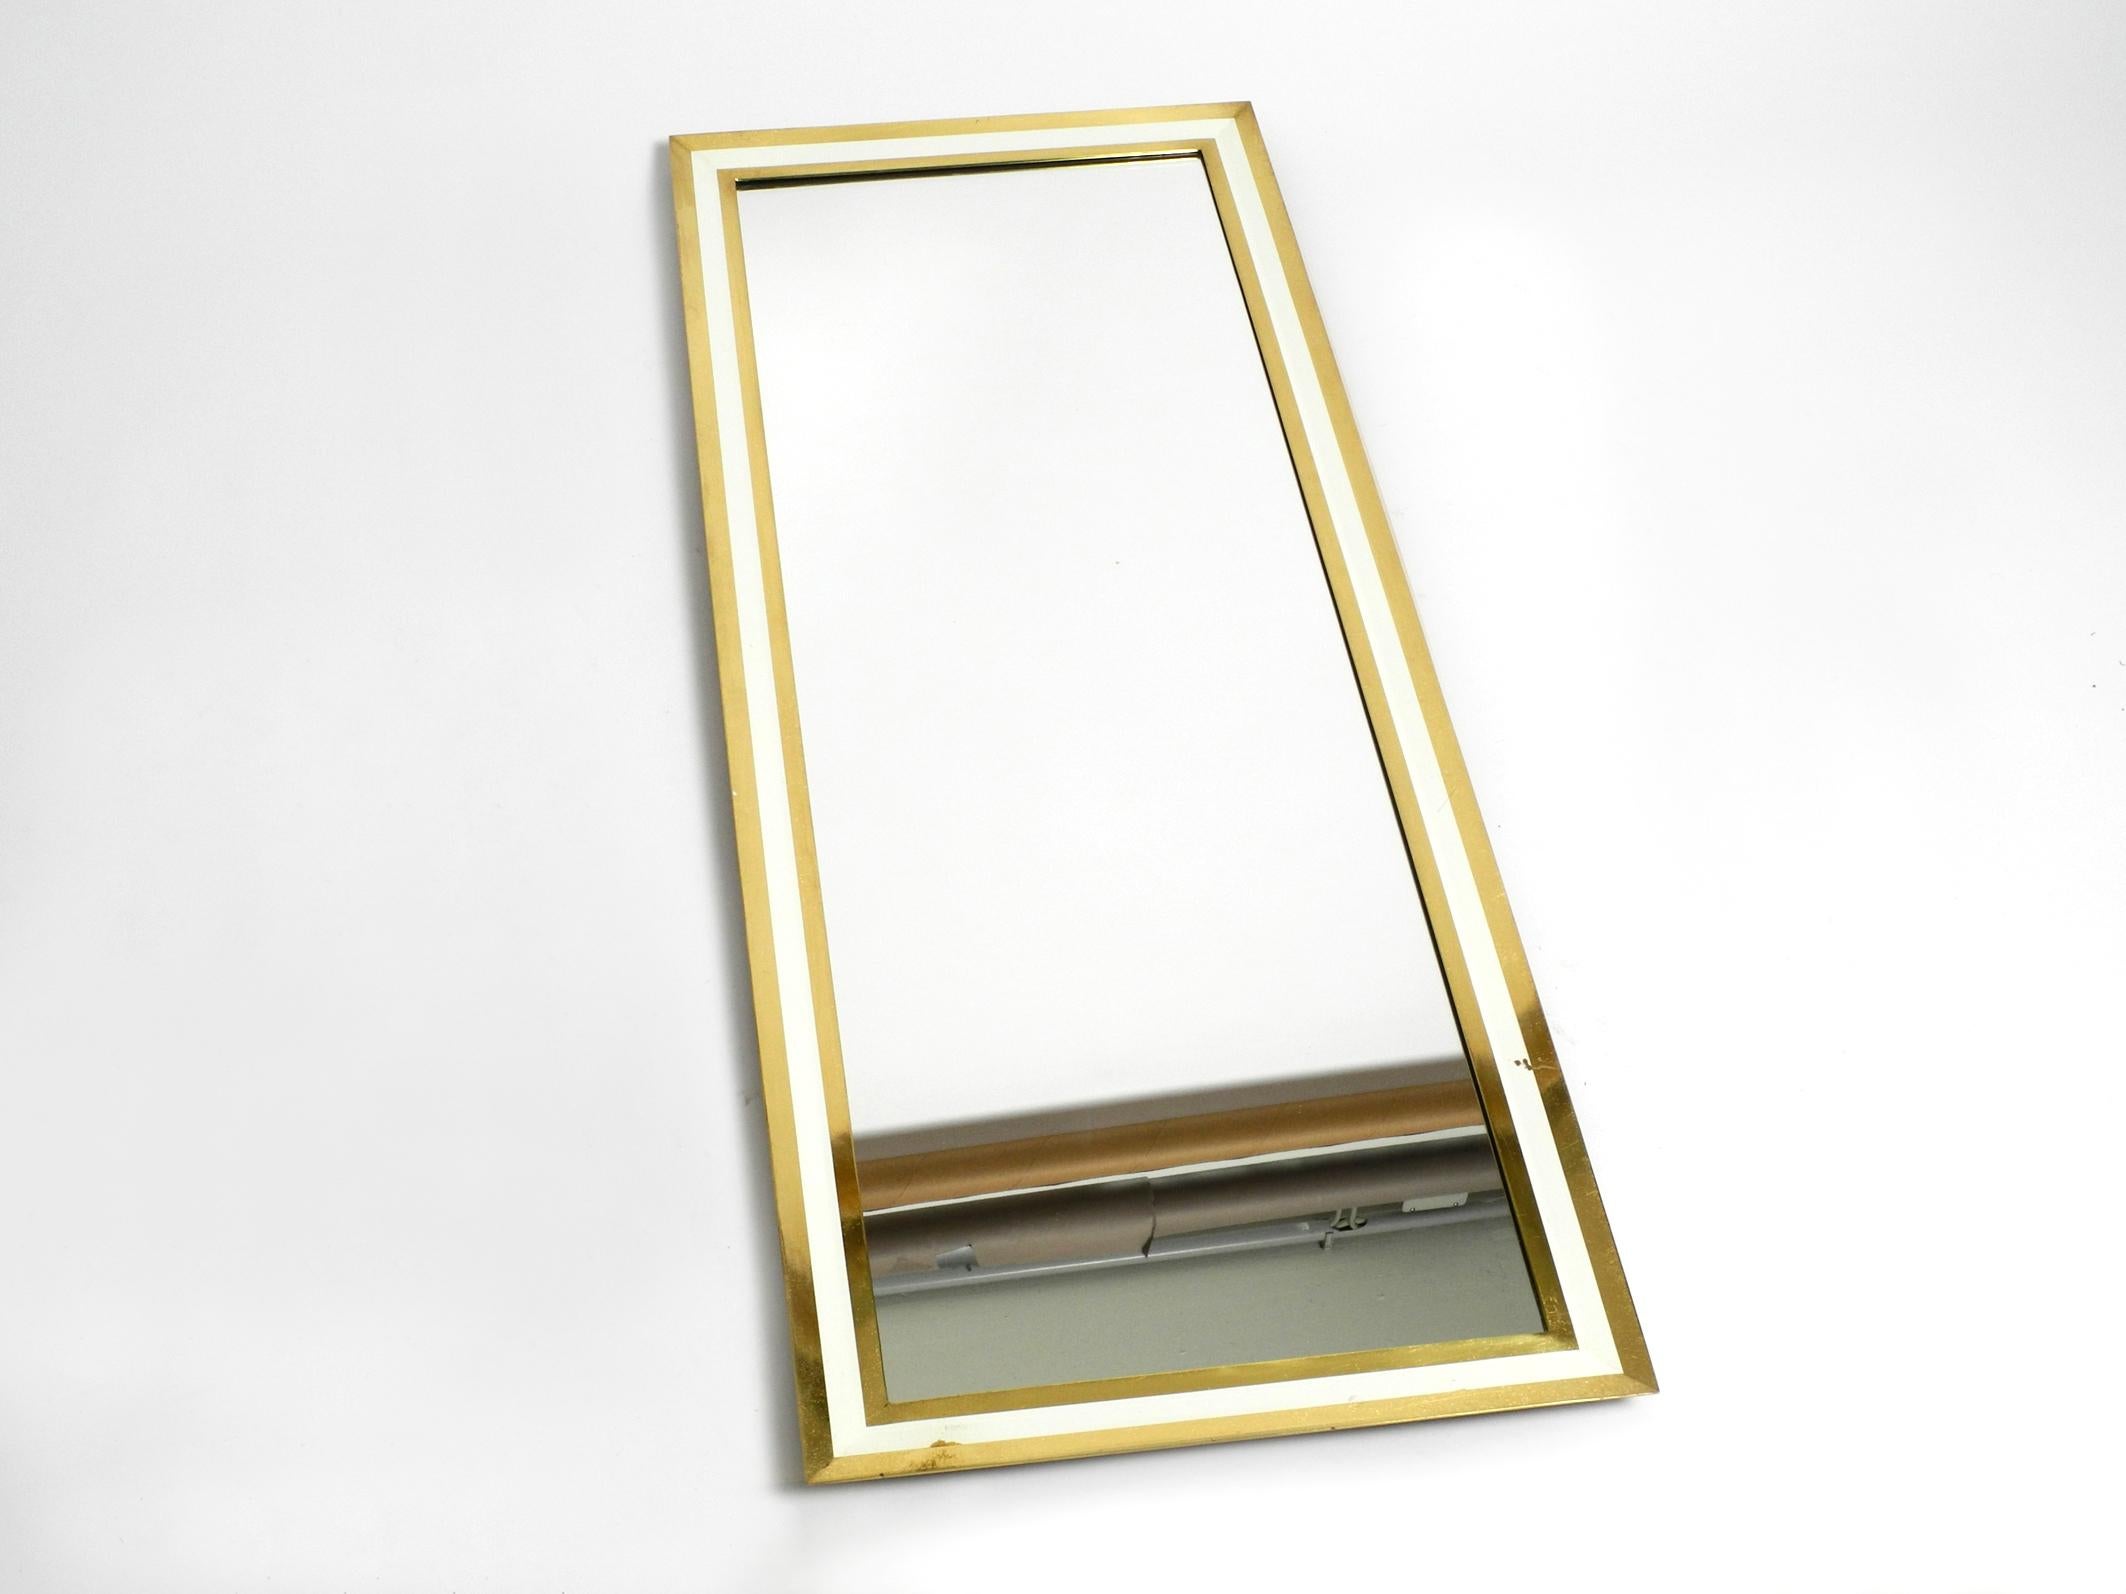 Very elegant heavy 1960s midcentury XXL brass wall mirror.
Manufacturer is Münchener Zierspiegel. With original label on the back. Made in Germany.
Great 1960s Minimalist design. Vertical to hang.
The entire frame is solid heavy brass, slightly